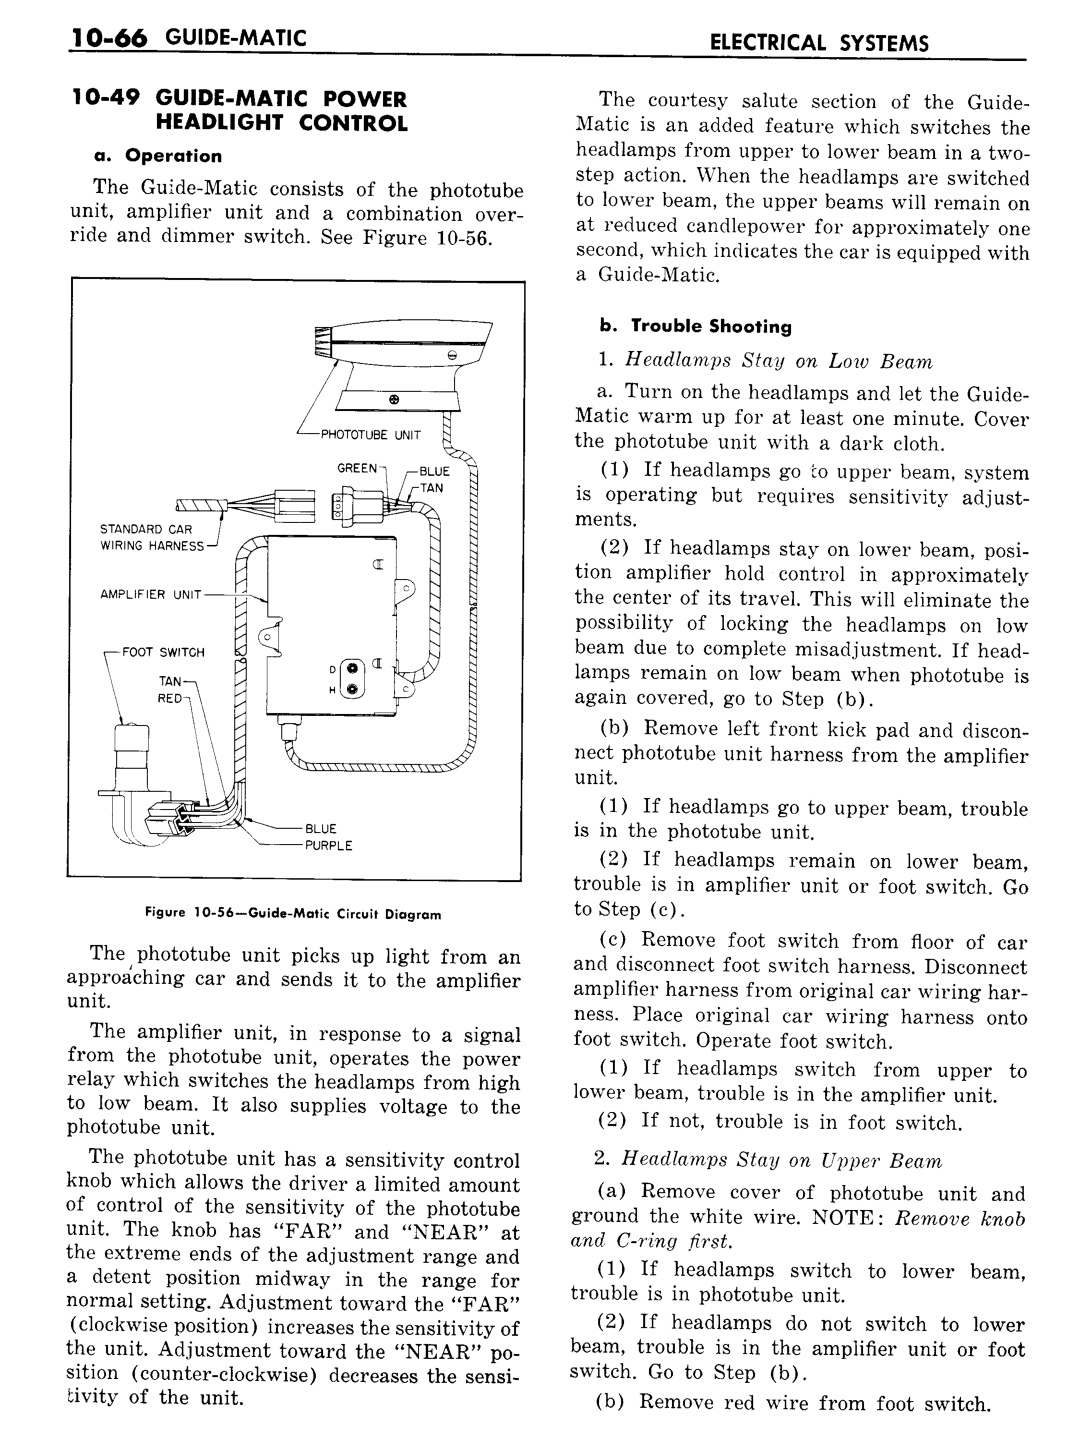 n_11 1960 Buick Shop Manual - Electrical Systems-066-066.jpg